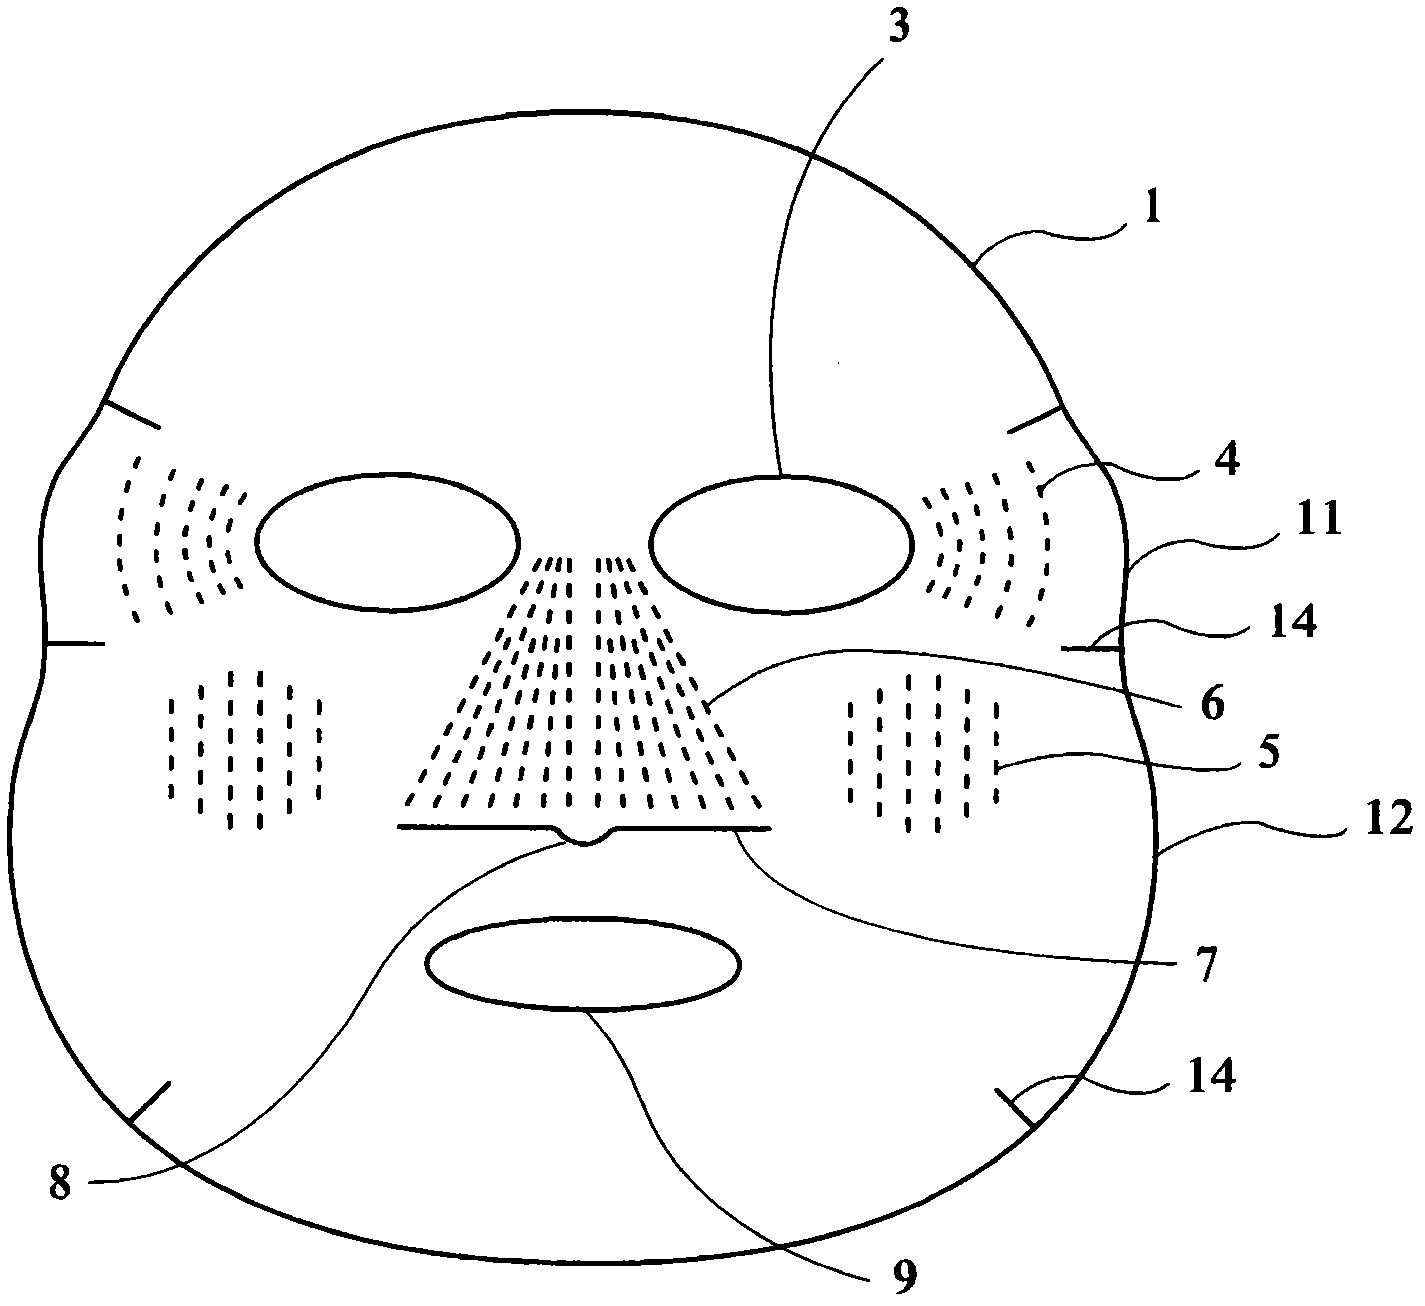 Multi-functional pack face mask corresponding to contours on face and neck